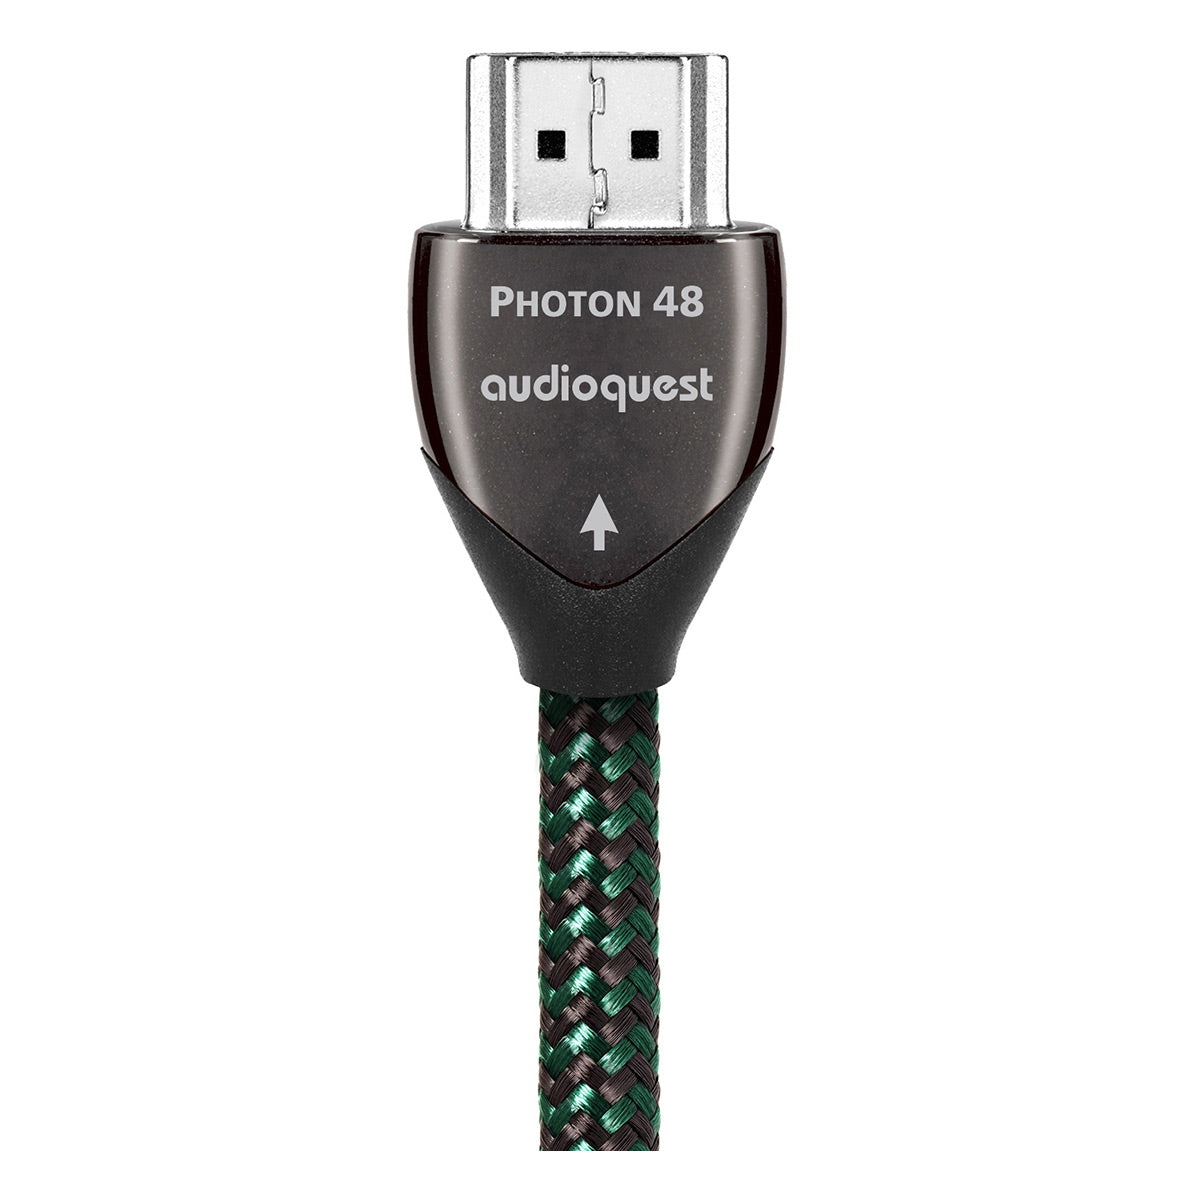 AudioQuest Photon 48 4K-8K 48Gbps Ultra High Speed HDMI Cable for Xbox - 4.9 ft. (1.5m)